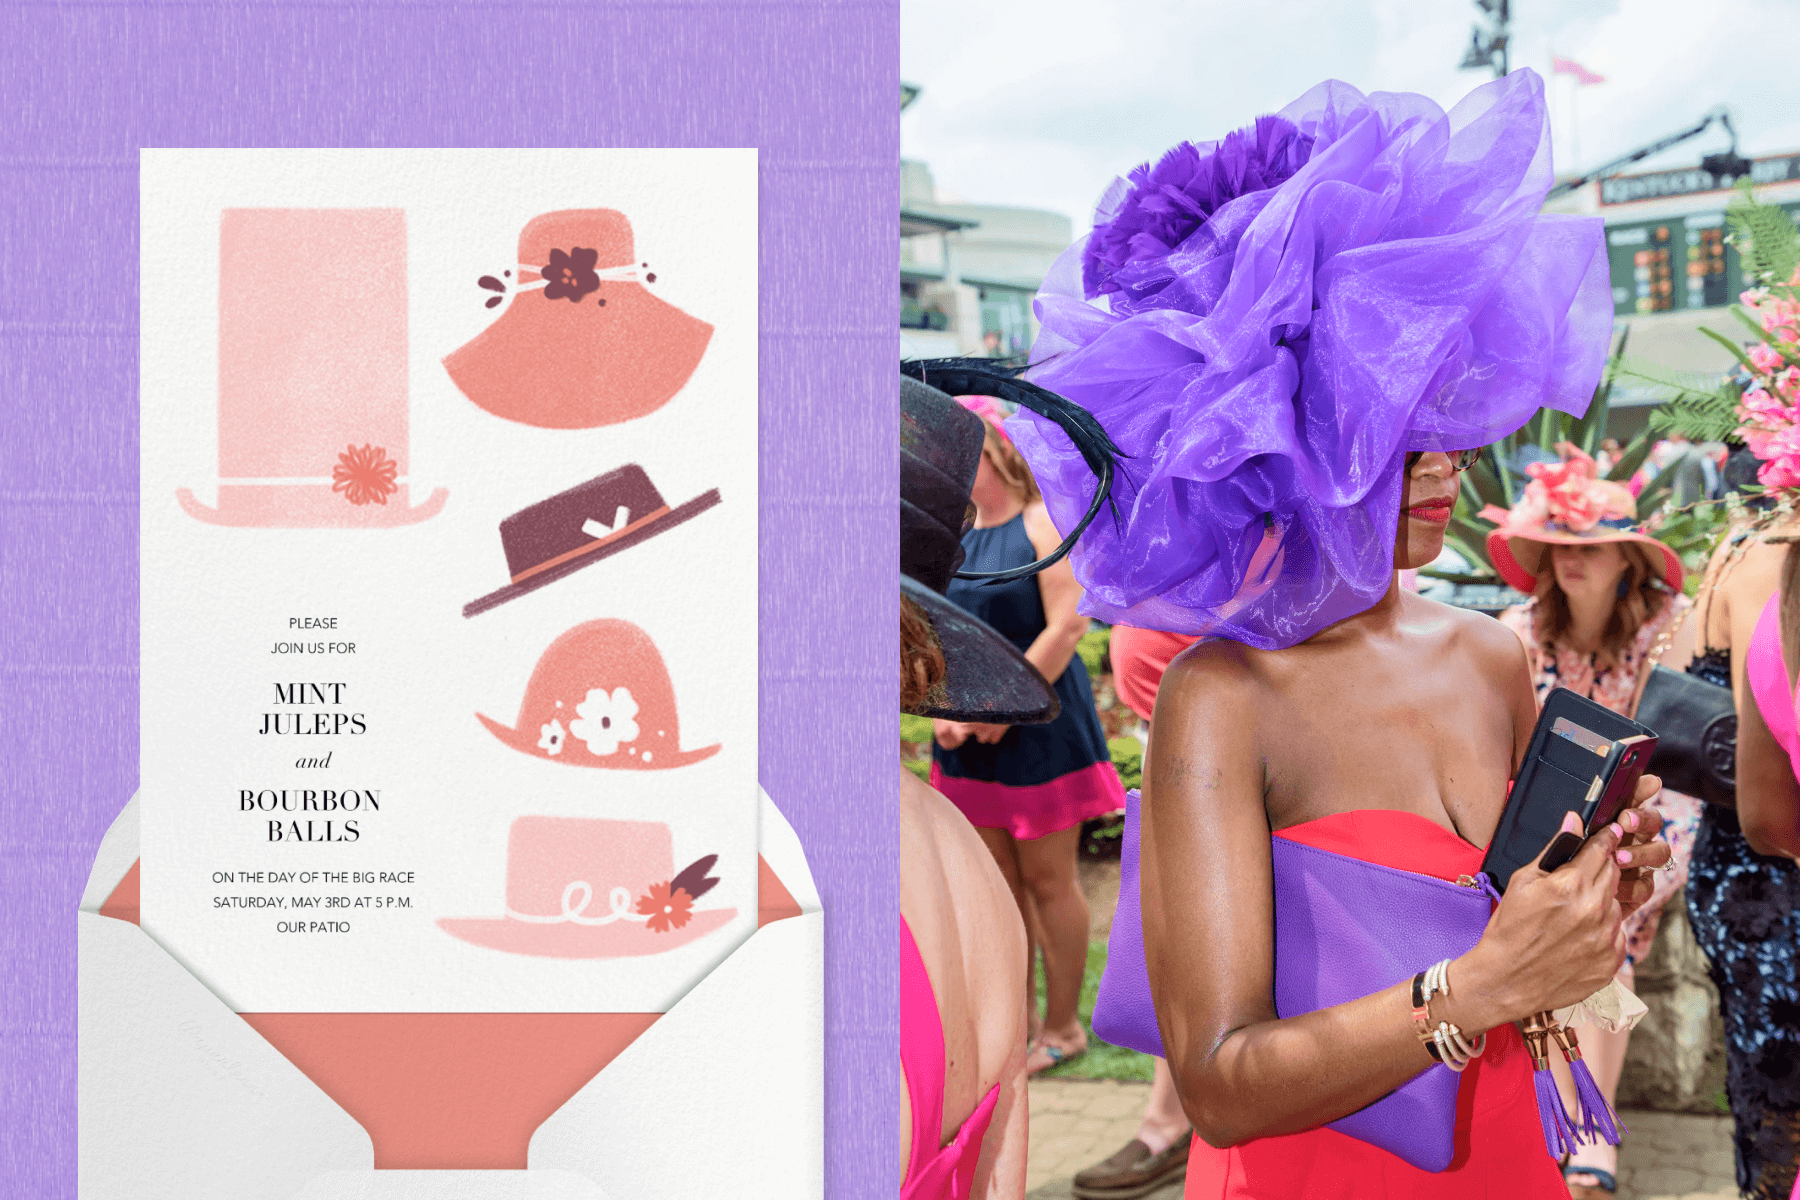 Left: A white invitation with illustrations of five different style pink hats. Right: A woman in a crowd wears a large purple hat that covers her face, resembling a flower.